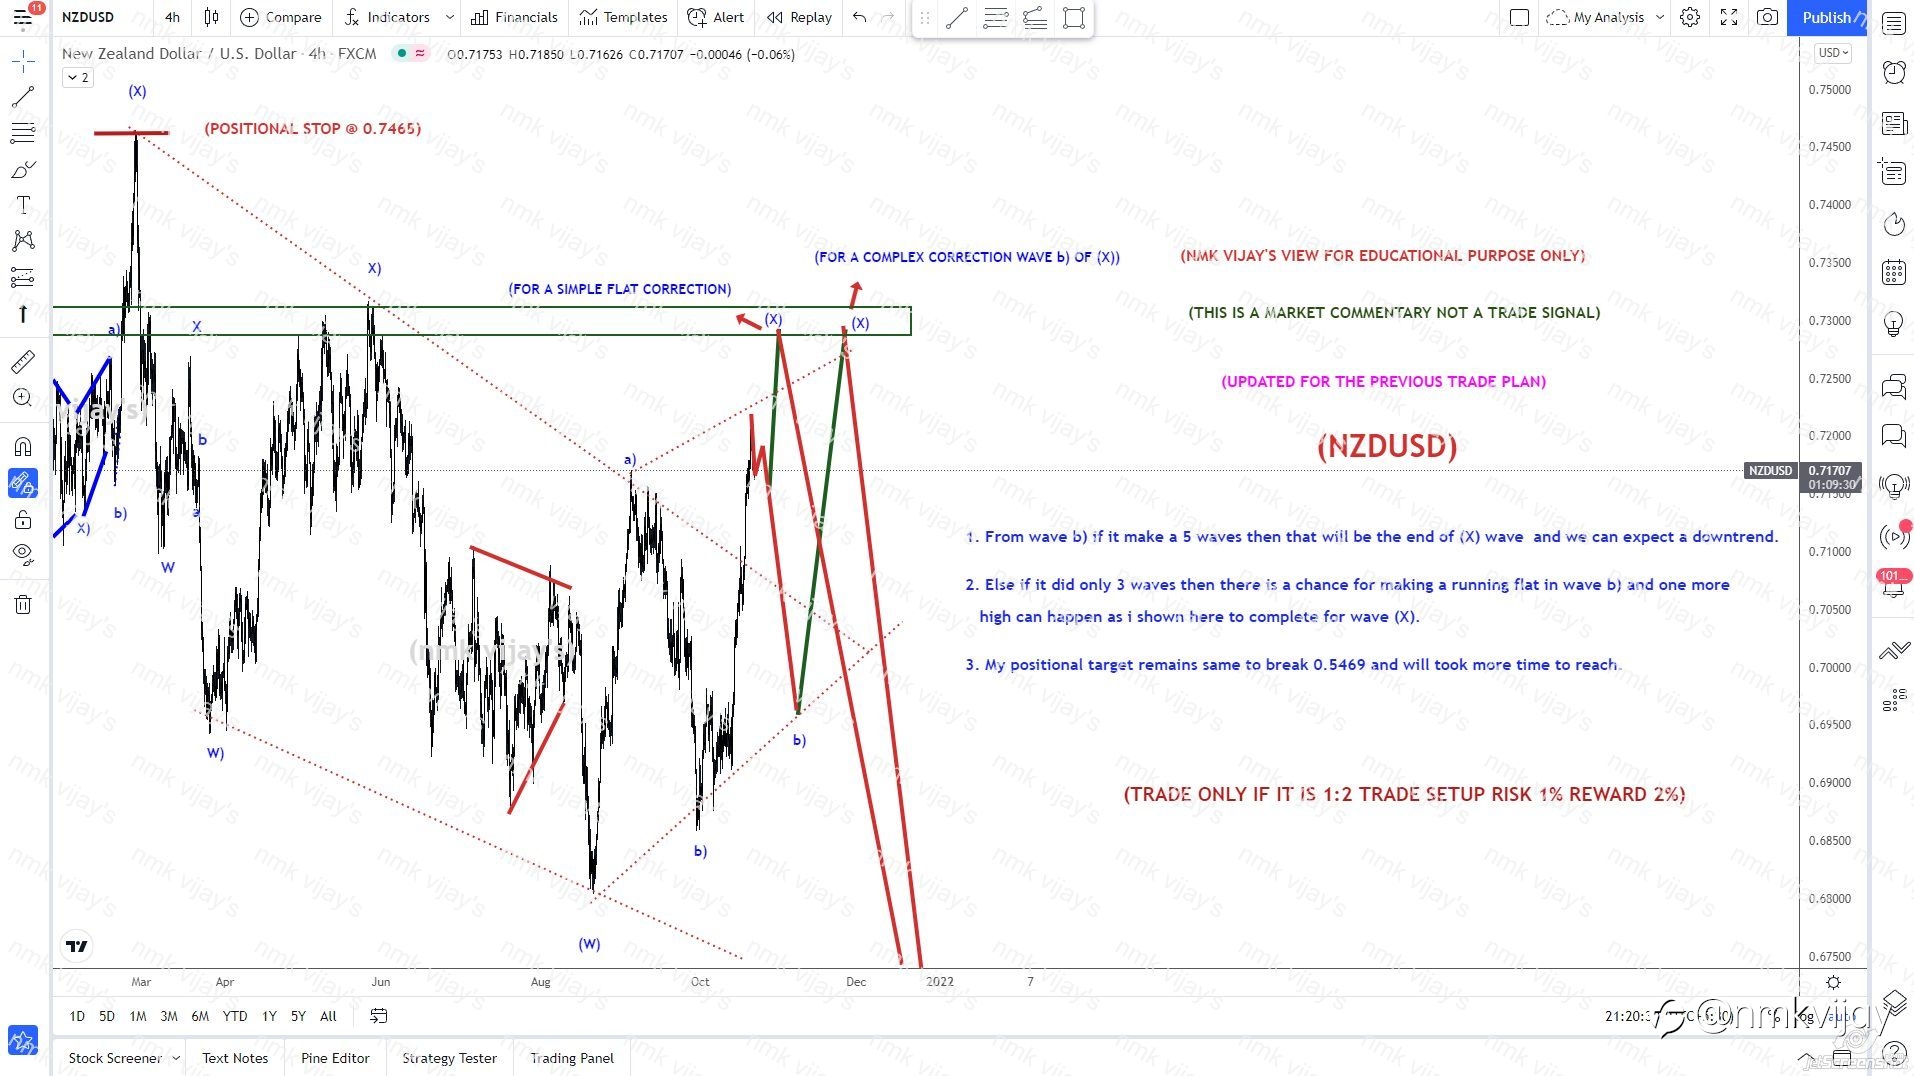 NZDUSD- Will complete 5 waves in C for (X) or running flat in b)